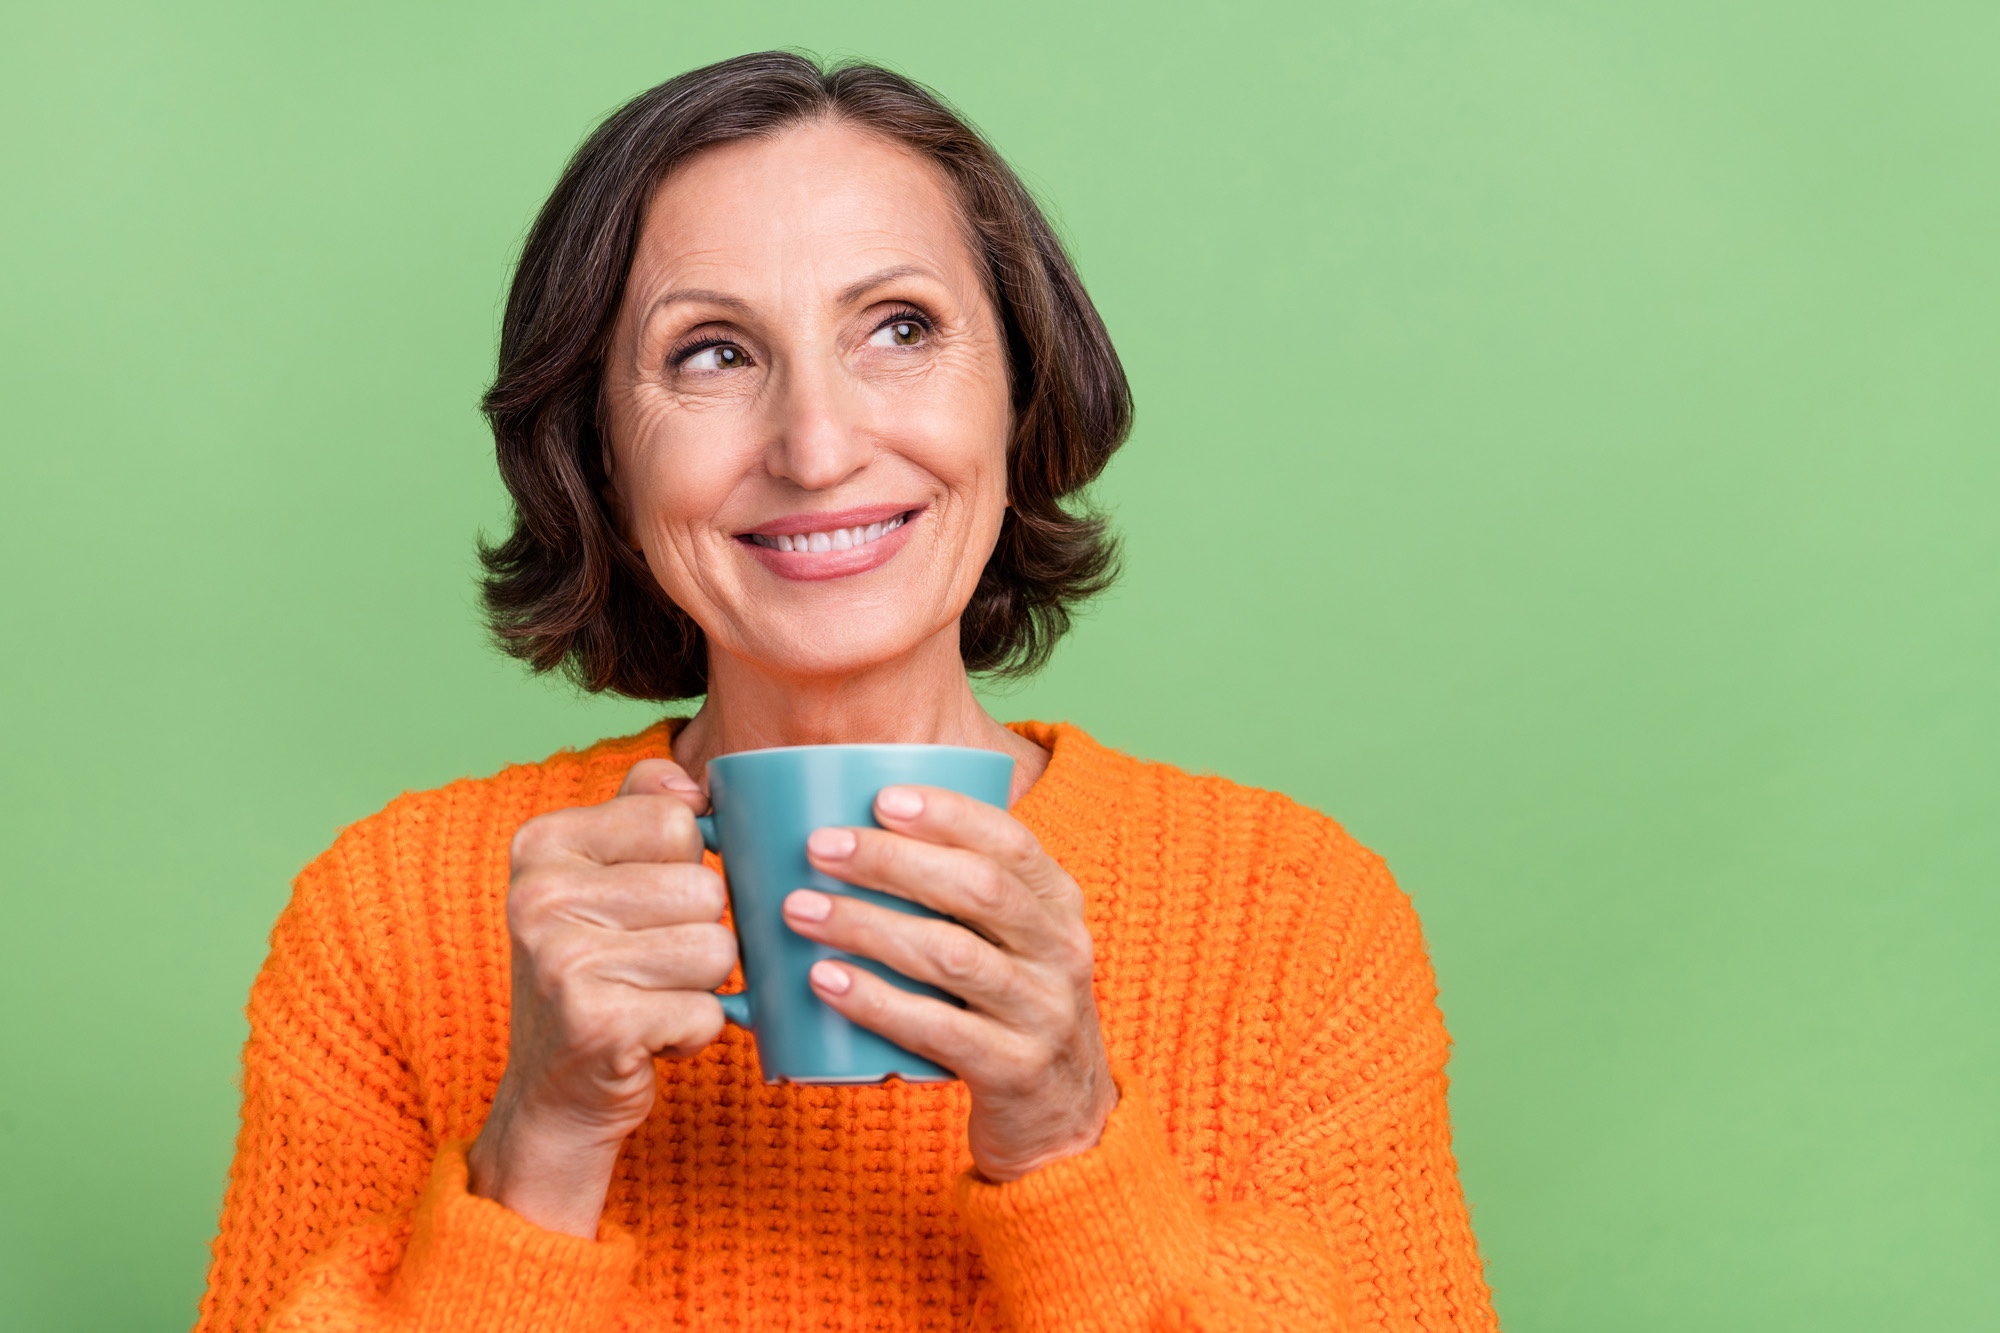 A retired age woman holding a cup of coffee, smiling.